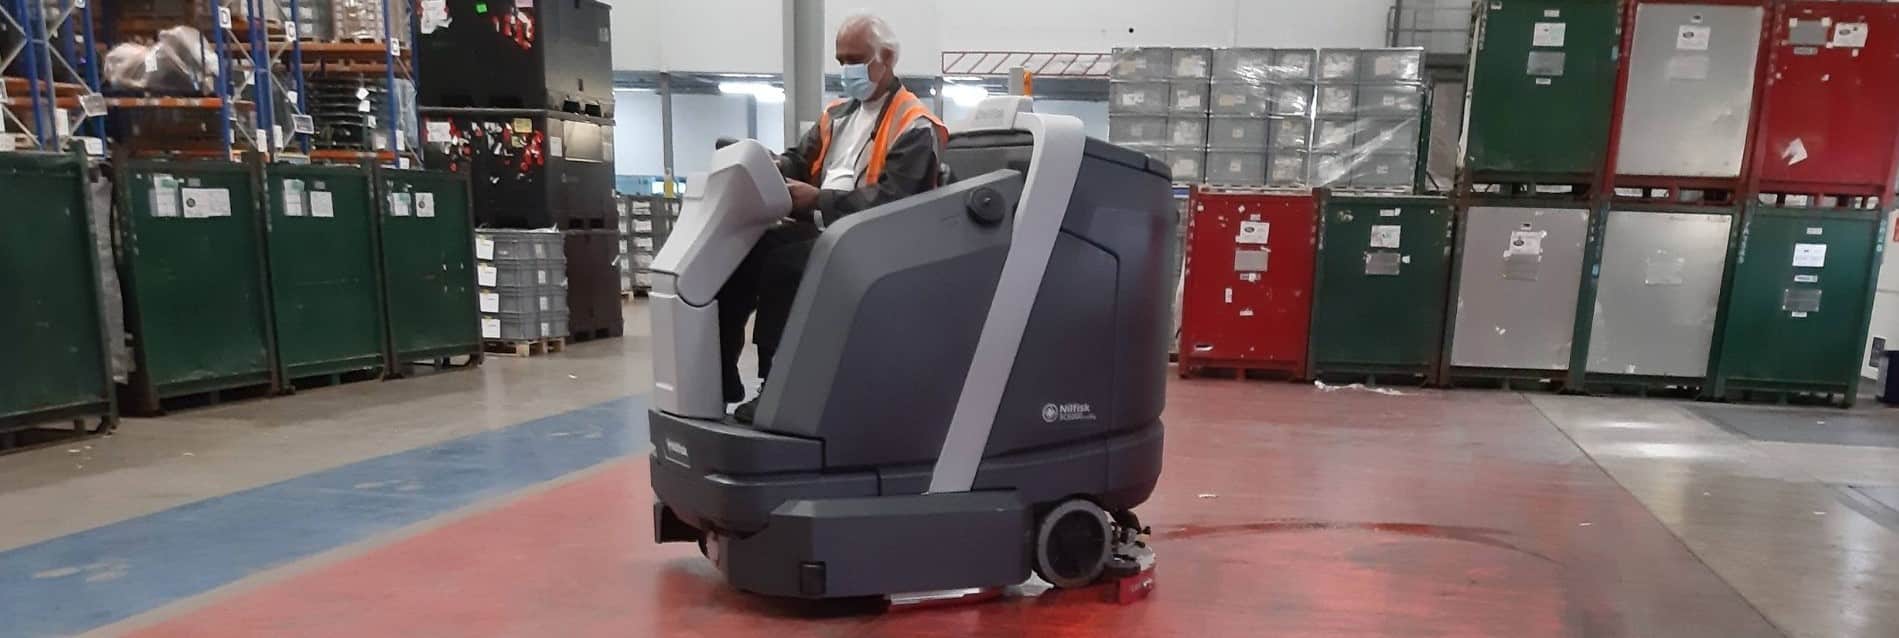 ride on floor scrubber hire